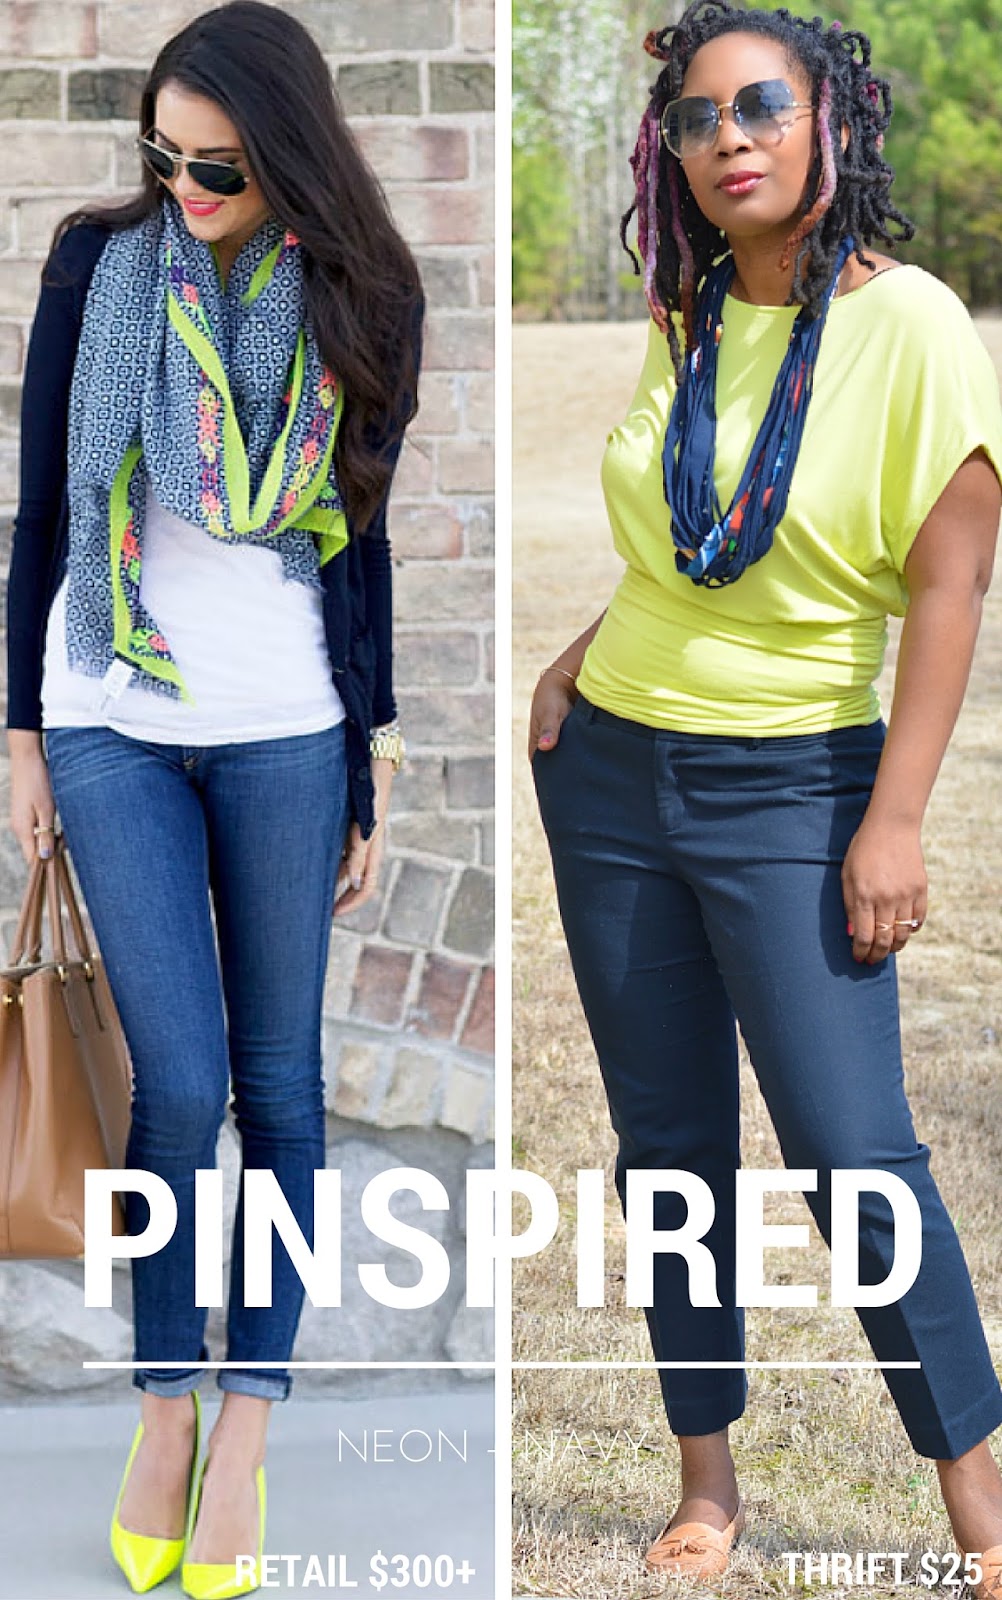 A Pinterest inspired thrift store outfit in neon and navy.